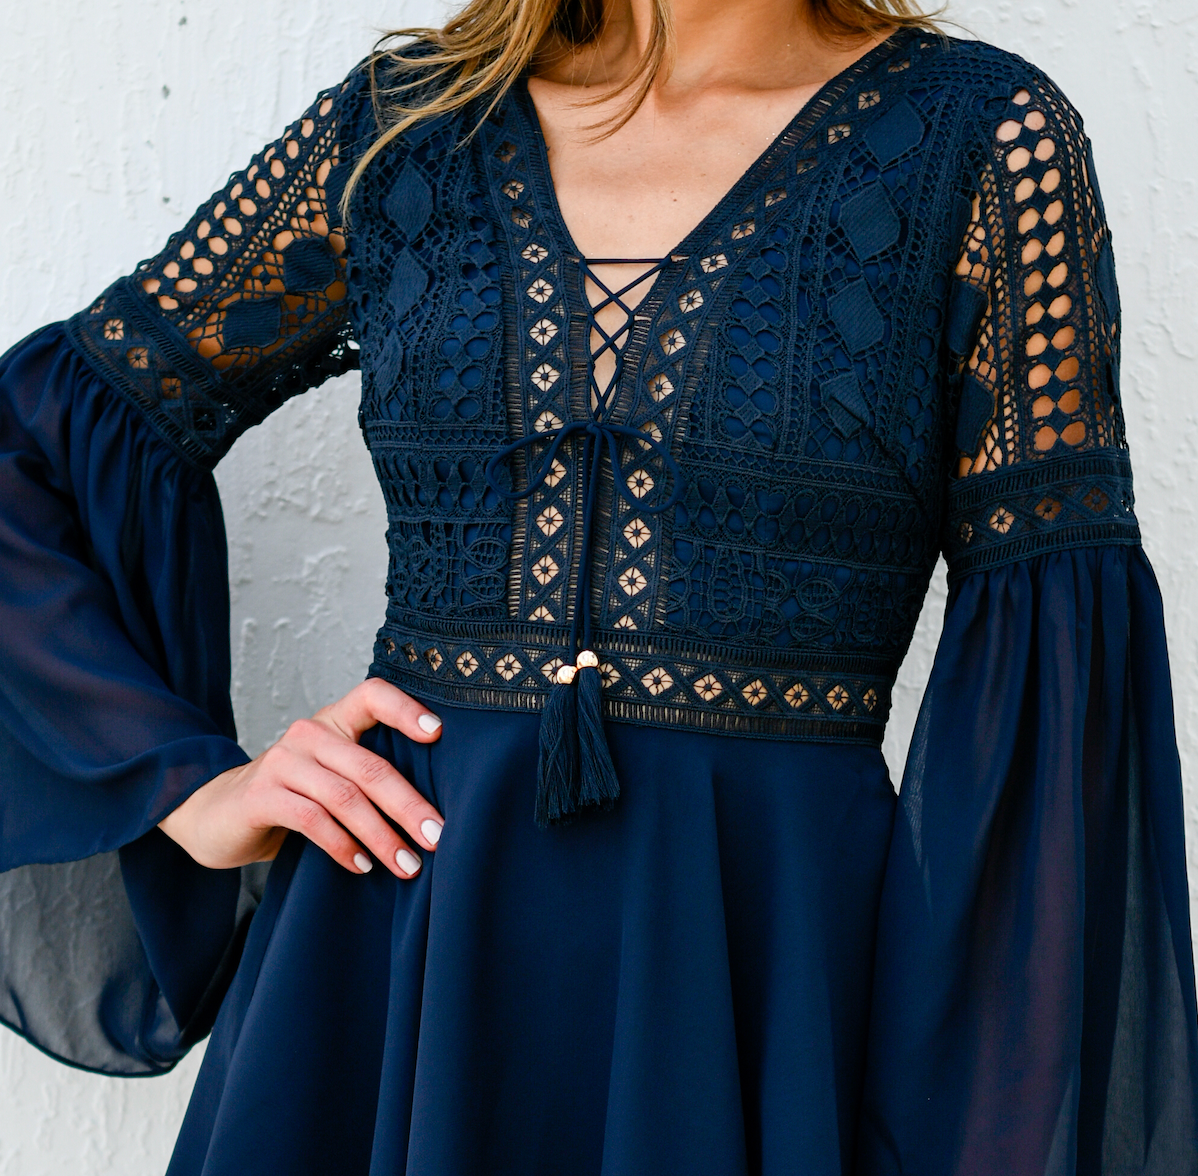 The Alyse Dress in Navy by Two Sisters the Label